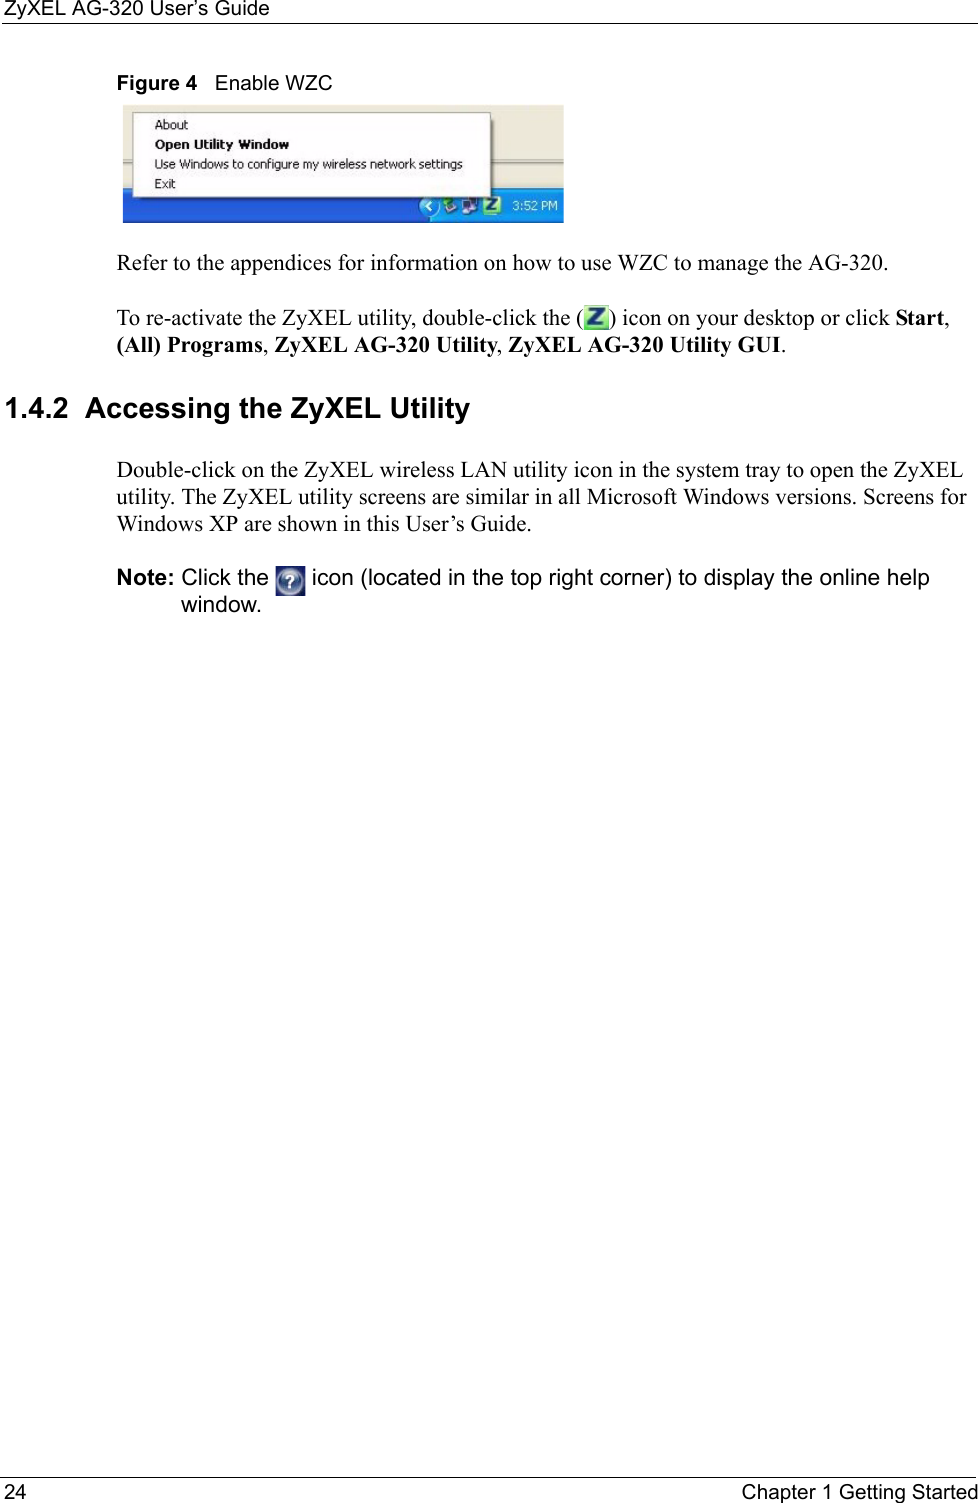 ZyXEL AG-320 User’s Guide24 Chapter 1 Getting StartedFigure 4   Enable WZCRefer to the appendices for information on how to use WZC to manage the AG-320.To re-activate the ZyXEL utility, double-click the ( ) icon on your desktop or click Start, (All) Programs, ZyXEL AG-320 Utility, ZyXEL AG-320 Utility GUI.1.4.2  Accessing the ZyXEL Utility Double-click on the ZyXEL wireless LAN utility icon in the system tray to open the ZyXEL utility. The ZyXEL utility screens are similar in all Microsoft Windows versions. Screens for Windows XP are shown in this User’s Guide. Note: Click the   icon (located in the top right corner) to display the online help window.